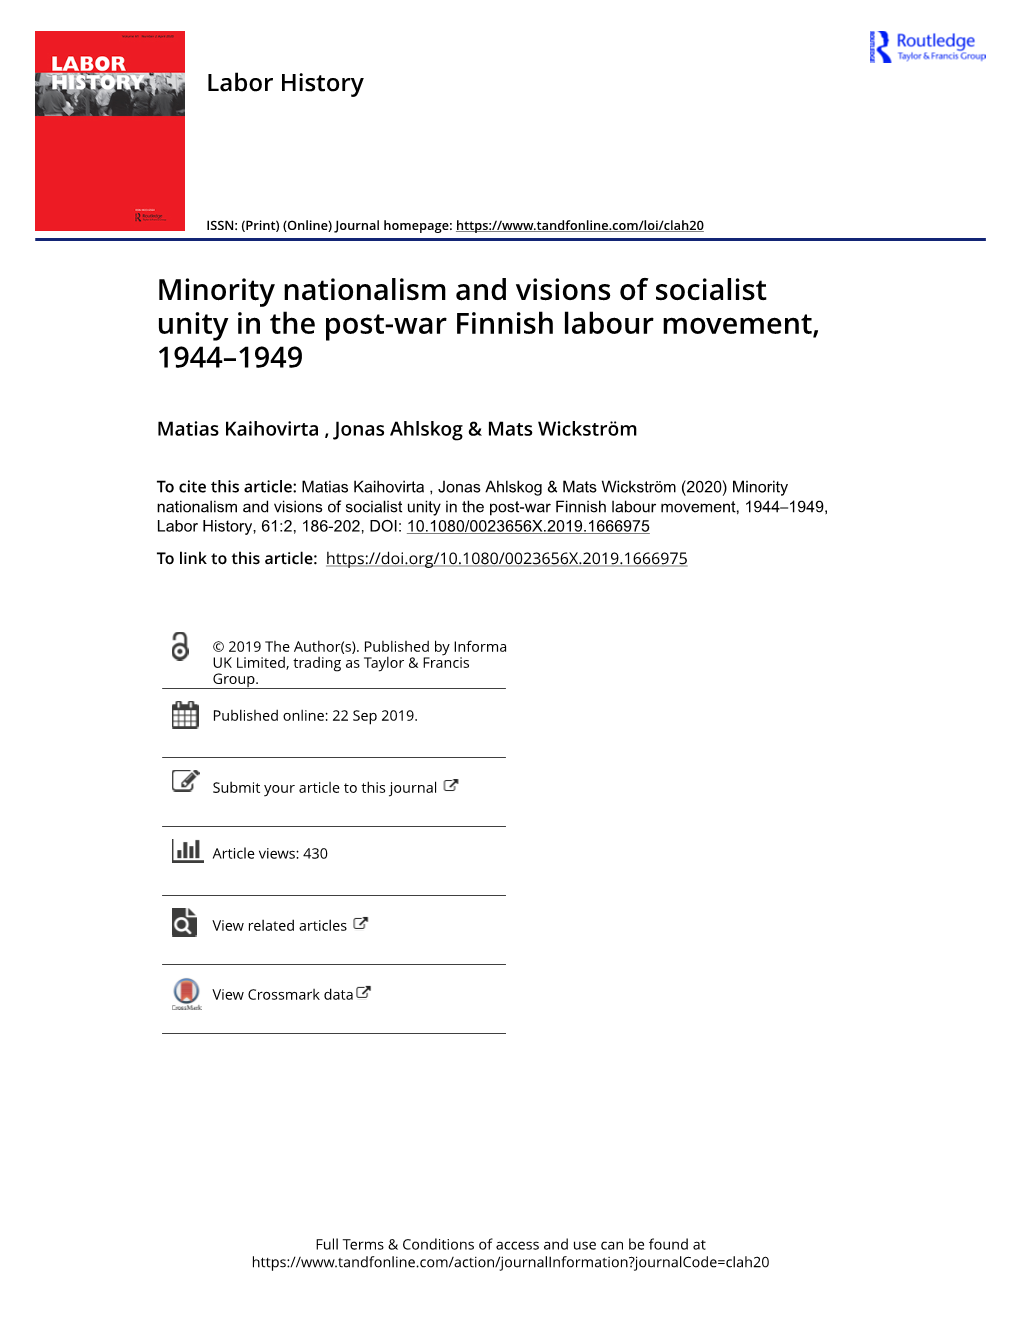 Minority Nationalism and Visions of Socialist Unity in the Post-War Finnish Labour Movement, 1944–1949